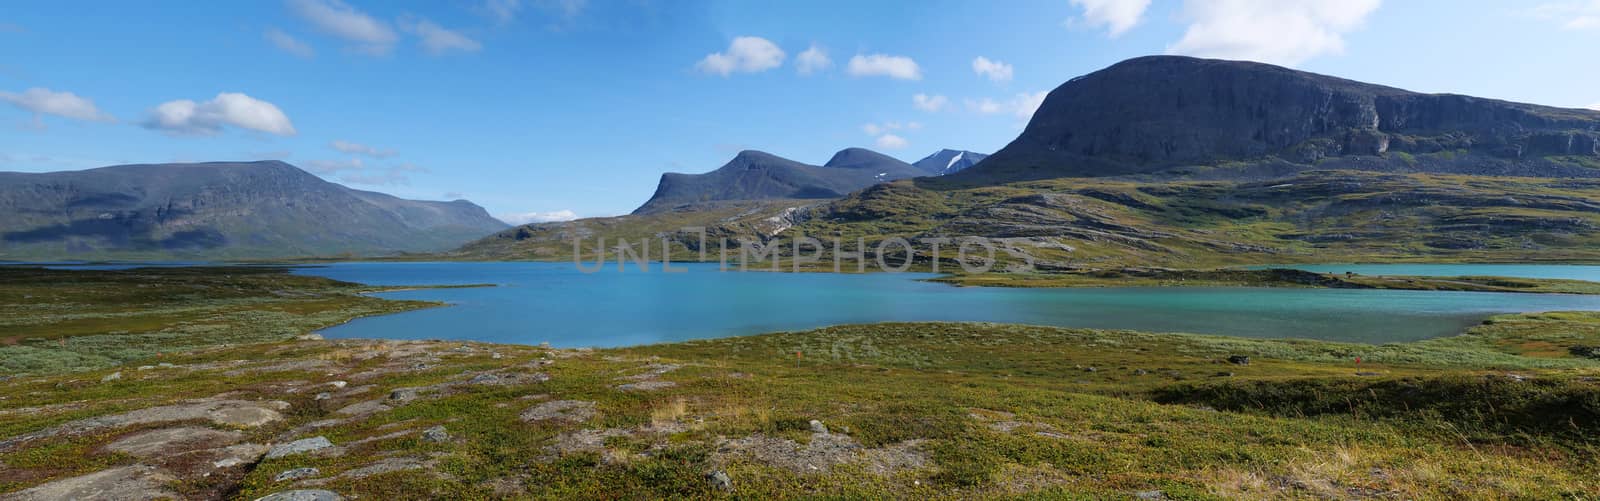 Lapland nature landscape wide panorama of blue glacial lake Allesjok near Alesjaure, birch tree forest, snow capped mountains. Northern Sweden, at Kungsleden hiking trail. Summer sunny day by Henkeova